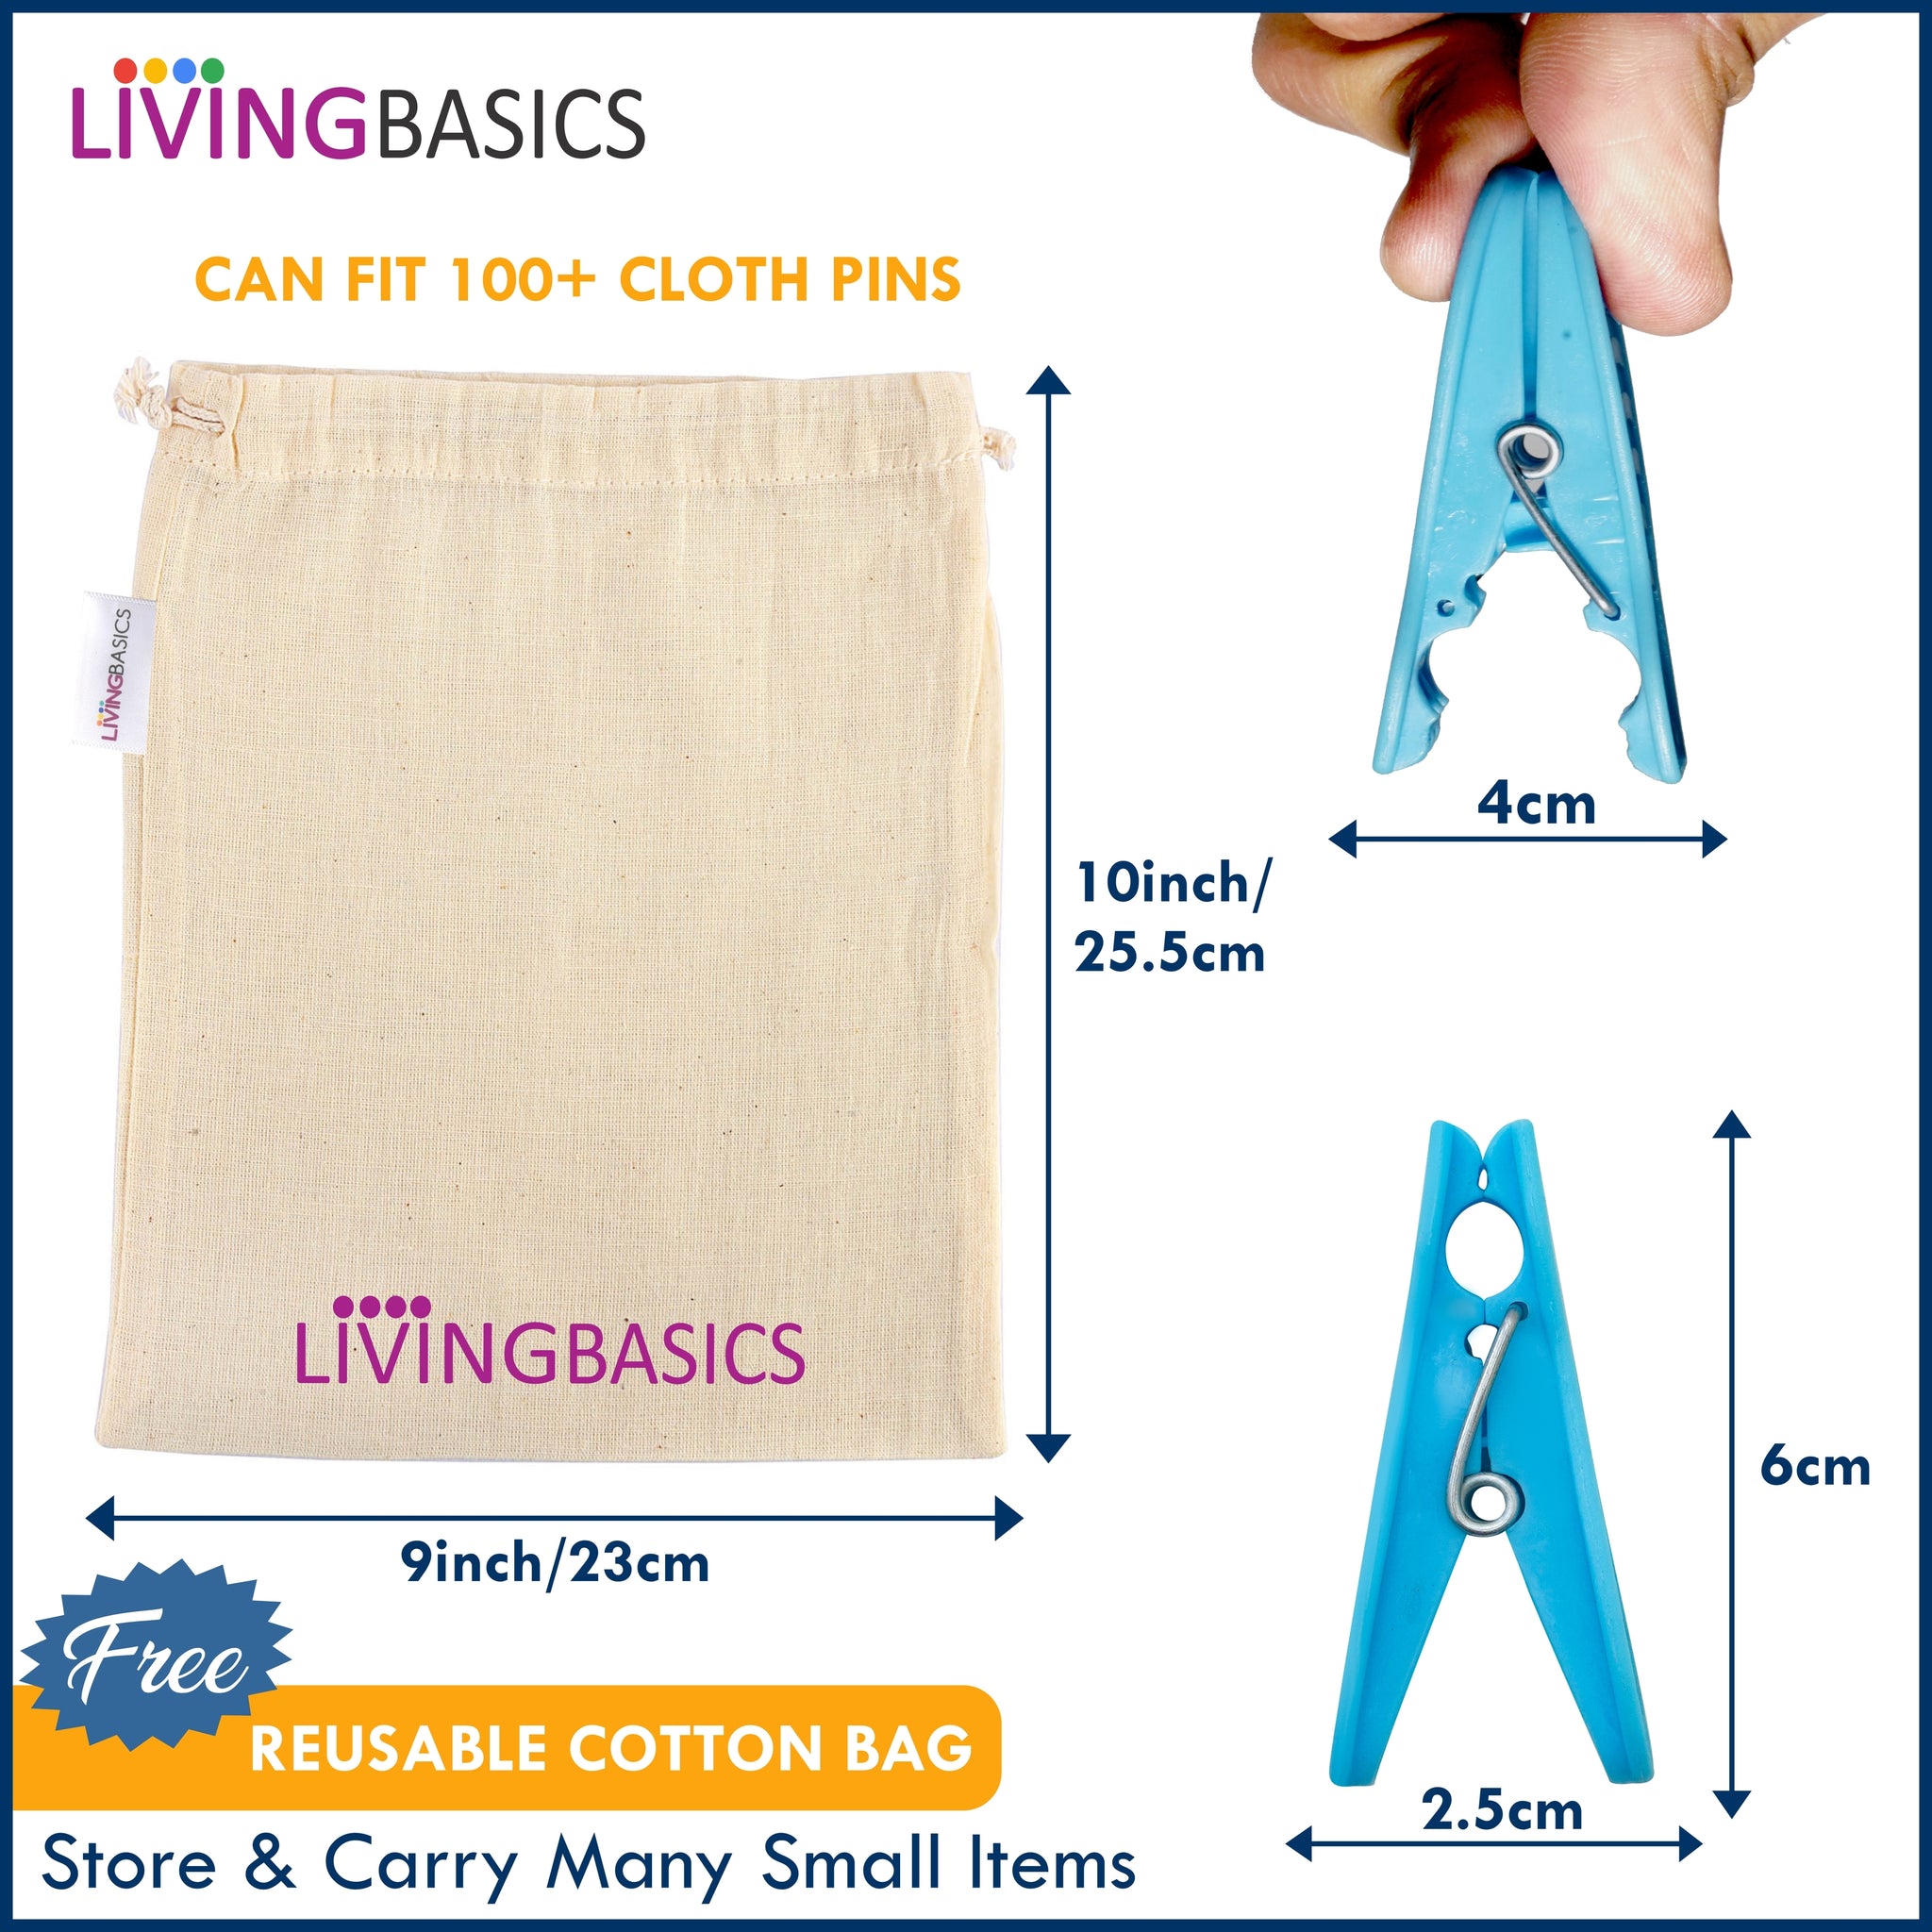 LivingBasics® Heavy Duty Rust Free Cloth Peg/Clothes Clip/Cloth Drying Pins/Pegs for Hanger/Rods/Ropes/Drying Clothes (24 Cloth Clip for Cloth Drying Stand) P (24 Cloth Clips for Ropes (M009))